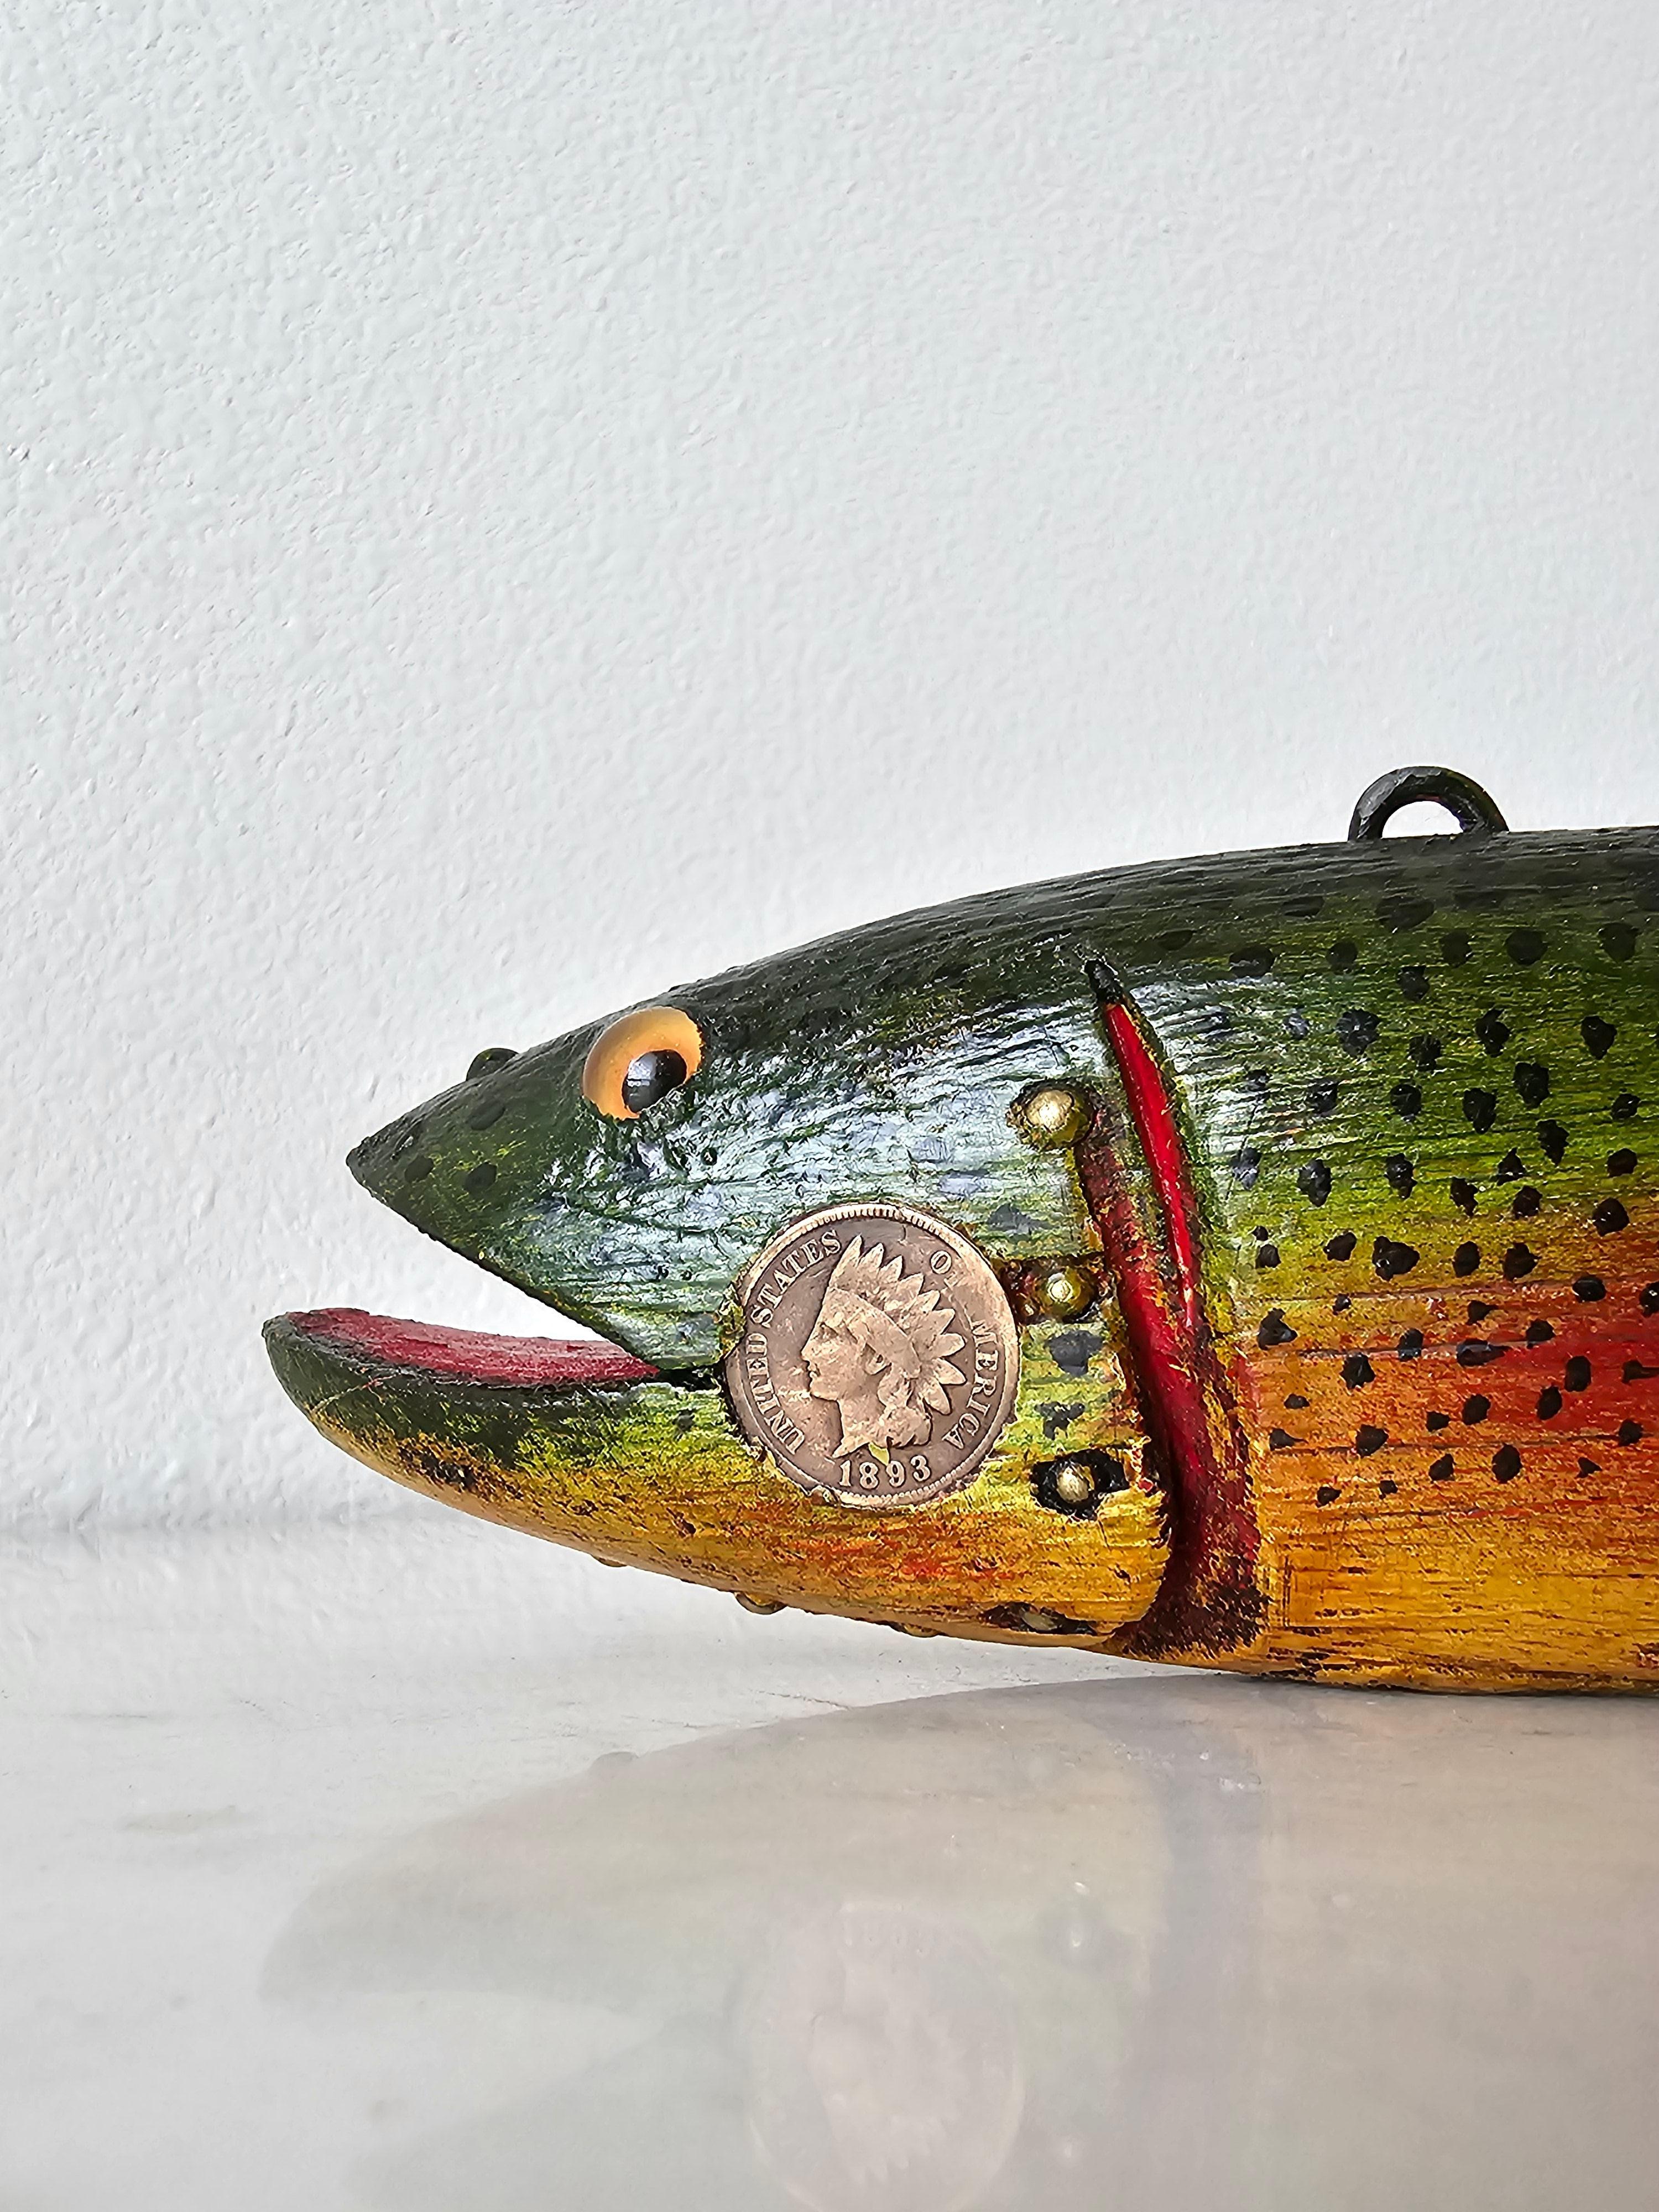 20th Century Vintage American Folk Art Duluth Fish Decoy Dfd Signed Carved Painted Trout